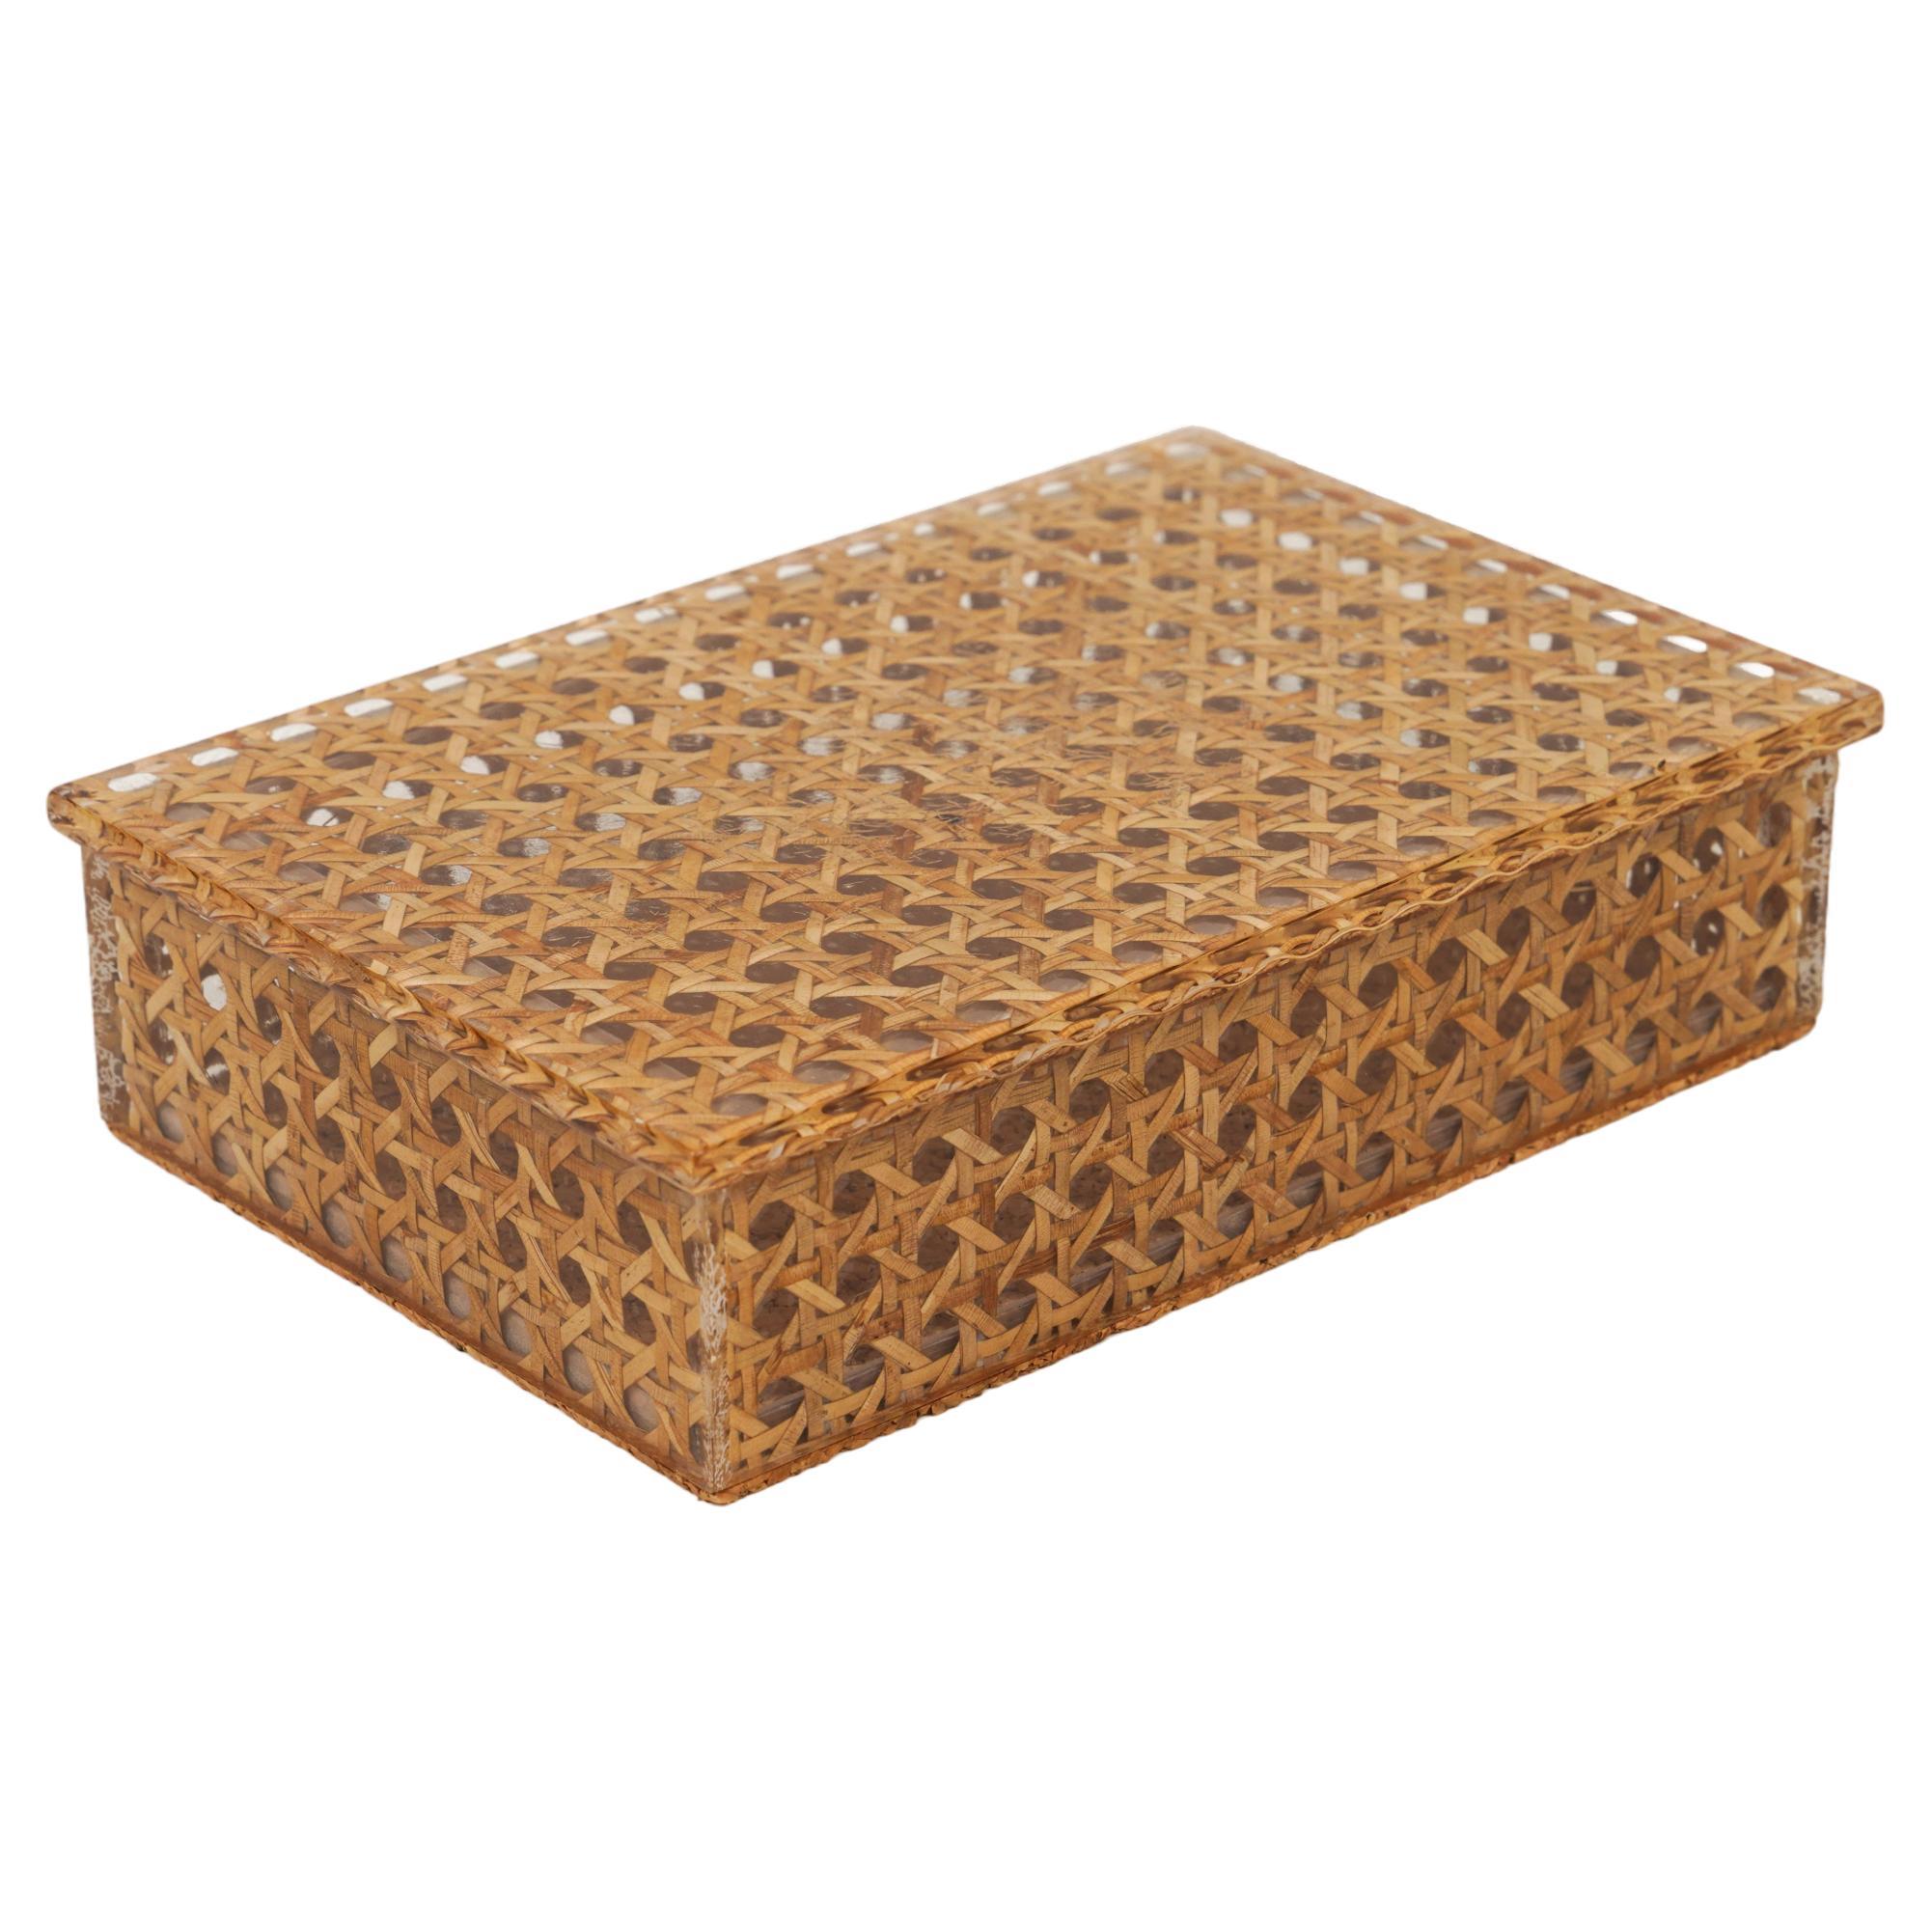 Midcentury Box in Rattan, Lucite and Cork Christian Dior Style, Italy 1970s For Sale